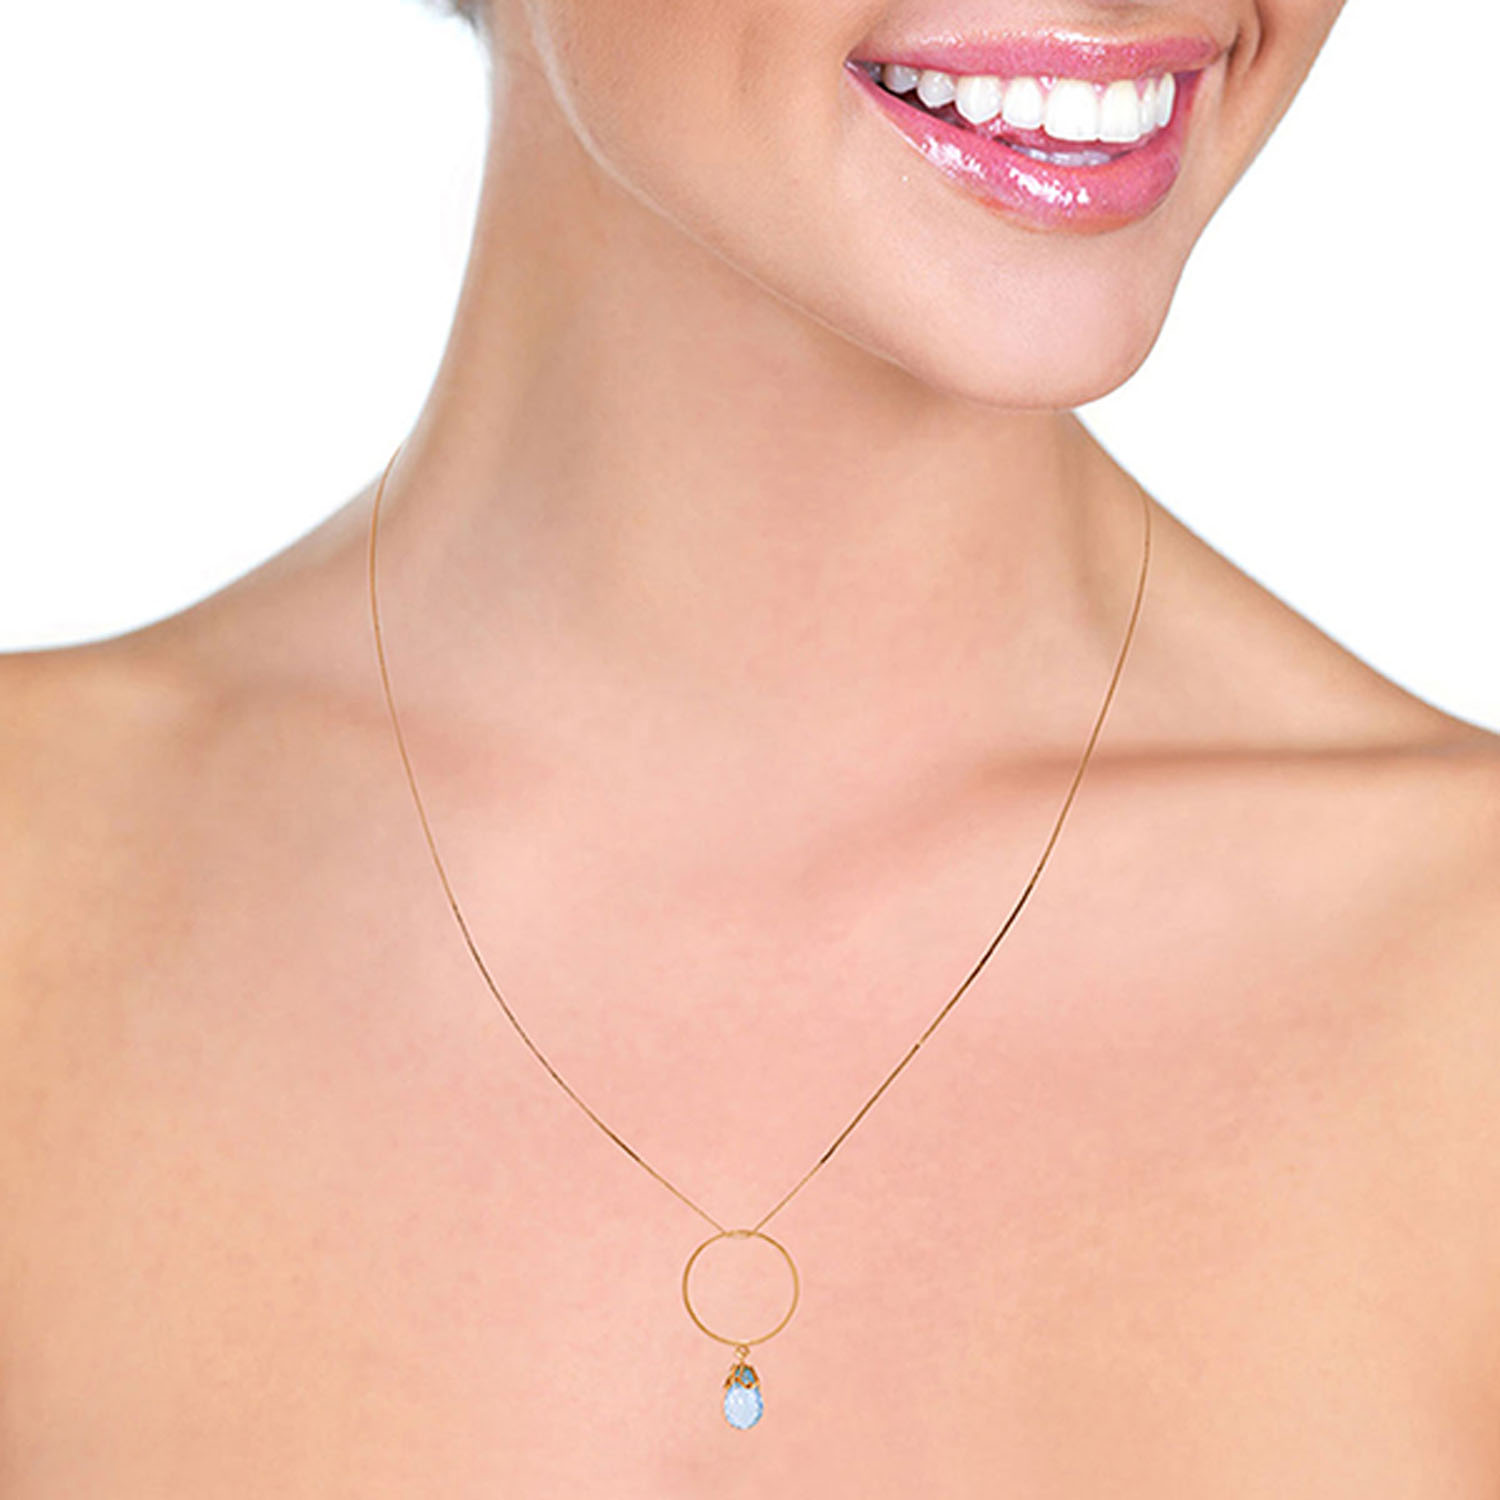 Galaxy Gold 3 Carat 14k 22" Solid Rose Gold Necklace with Natural Blue Topaz Charm Circle Pendant - image 2 of 2